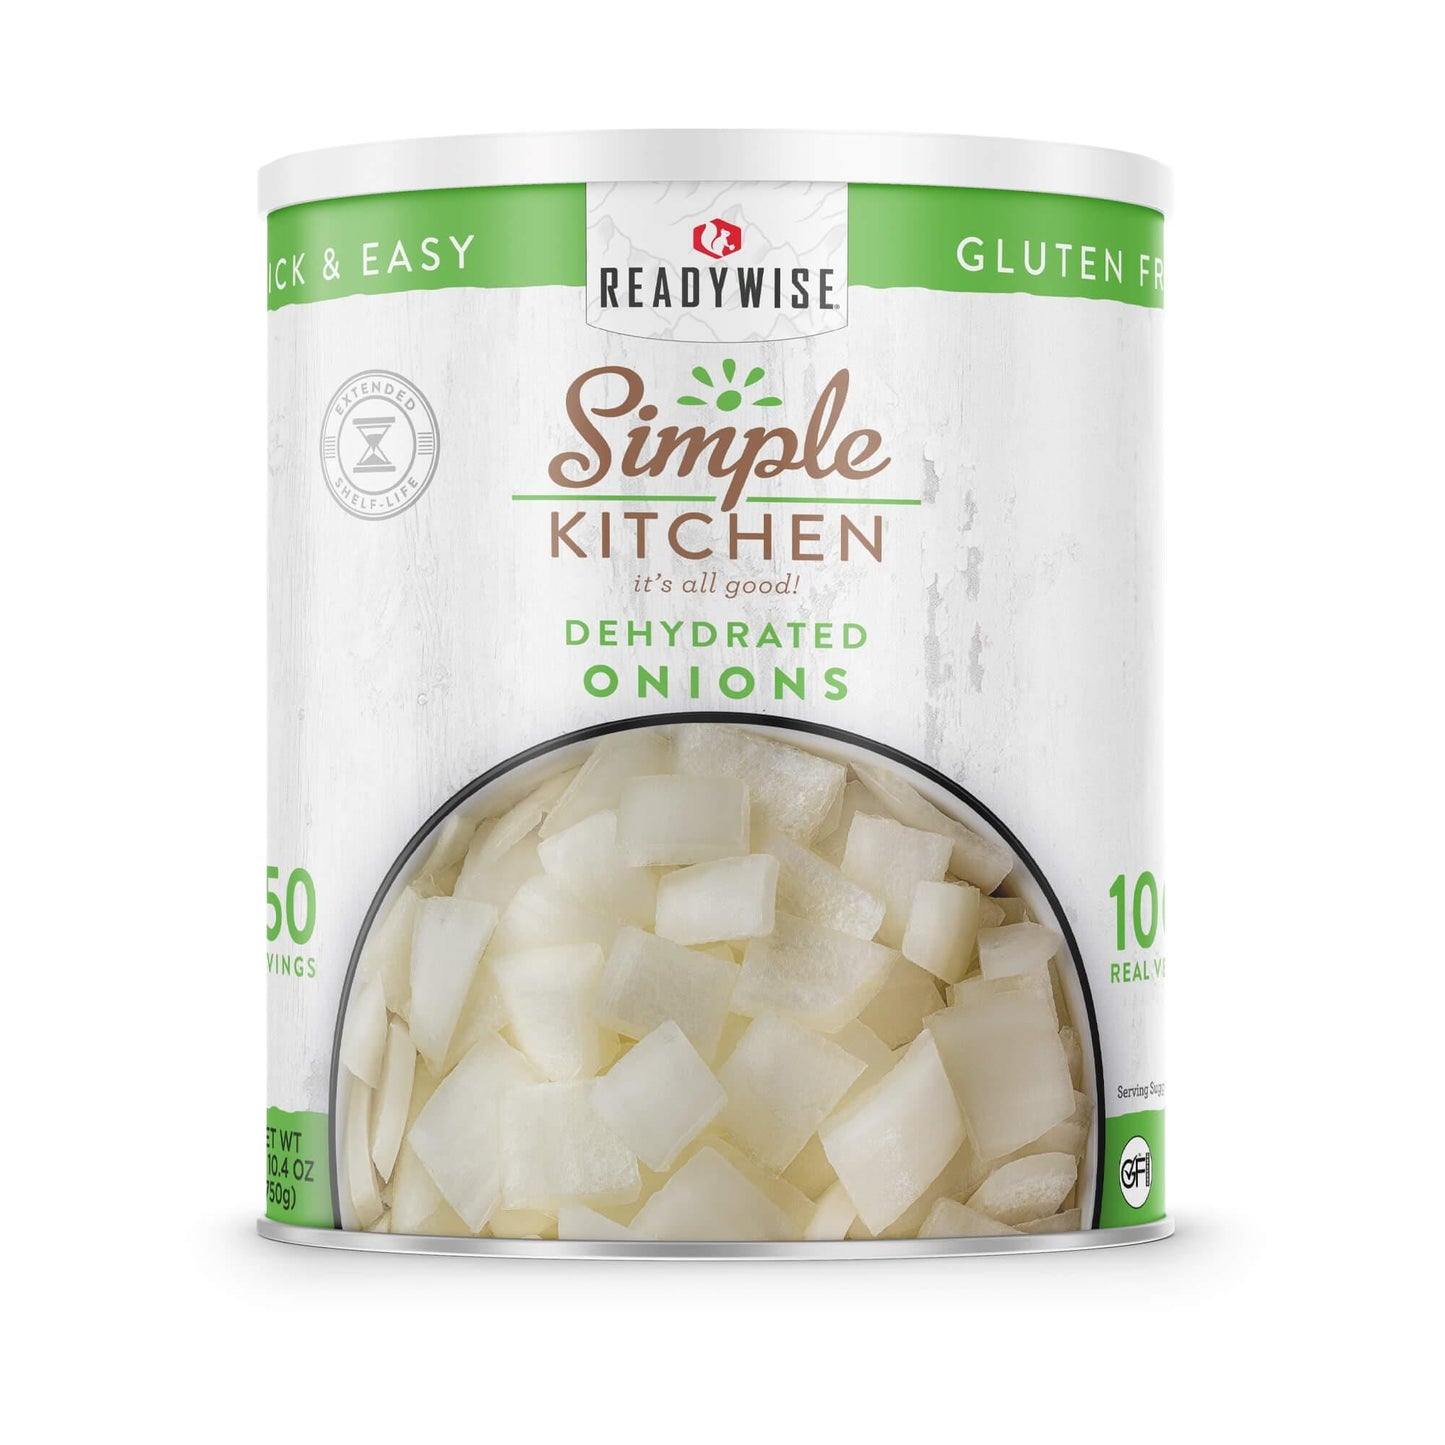 Simple-Kitchen-#10-can-dehydrated-onions